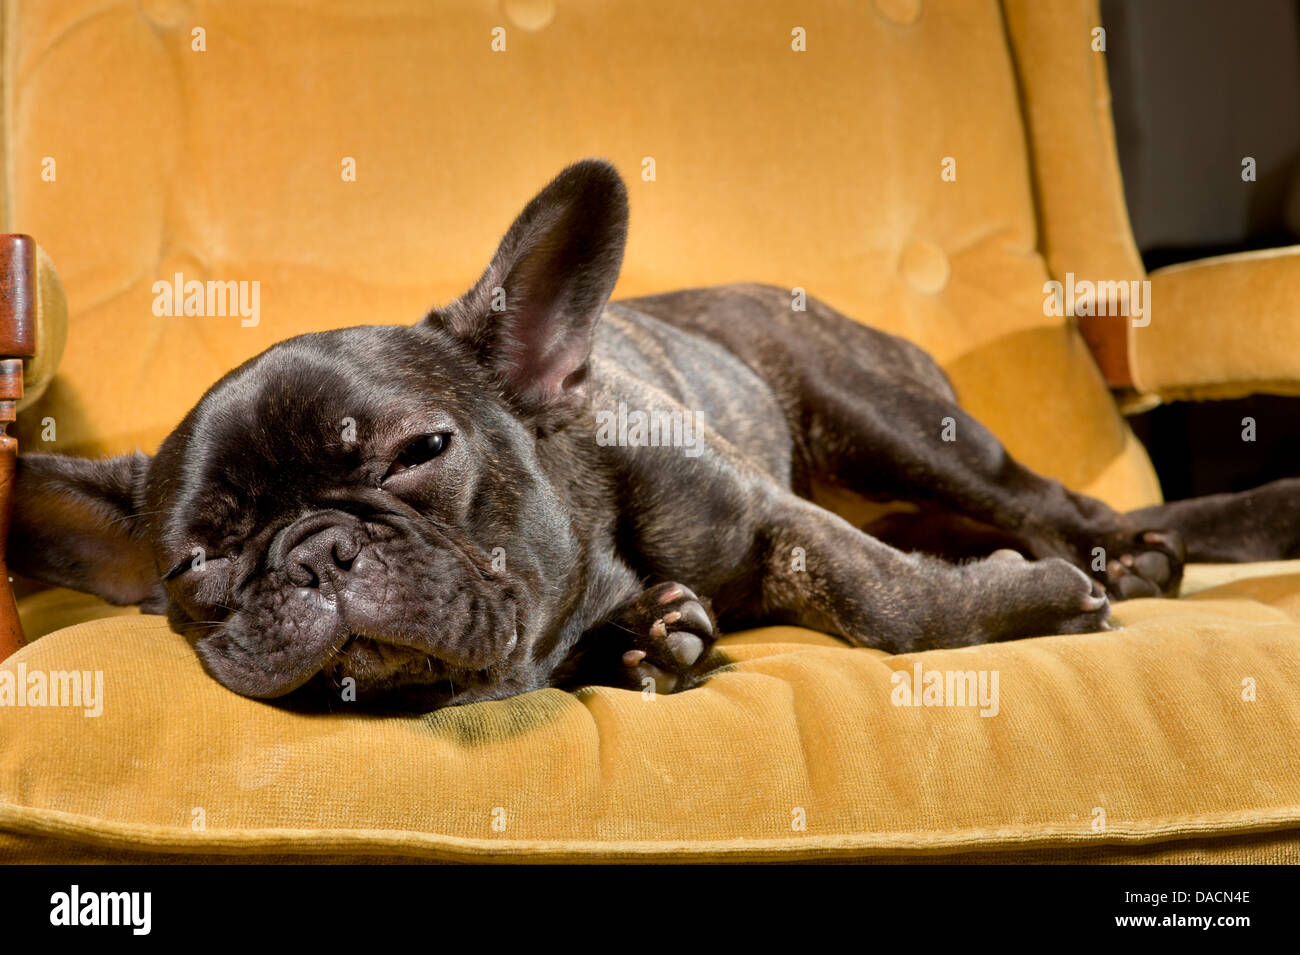 Sleepy Looking French Bulldog Puppy Lying On A Yellow Chair Stock